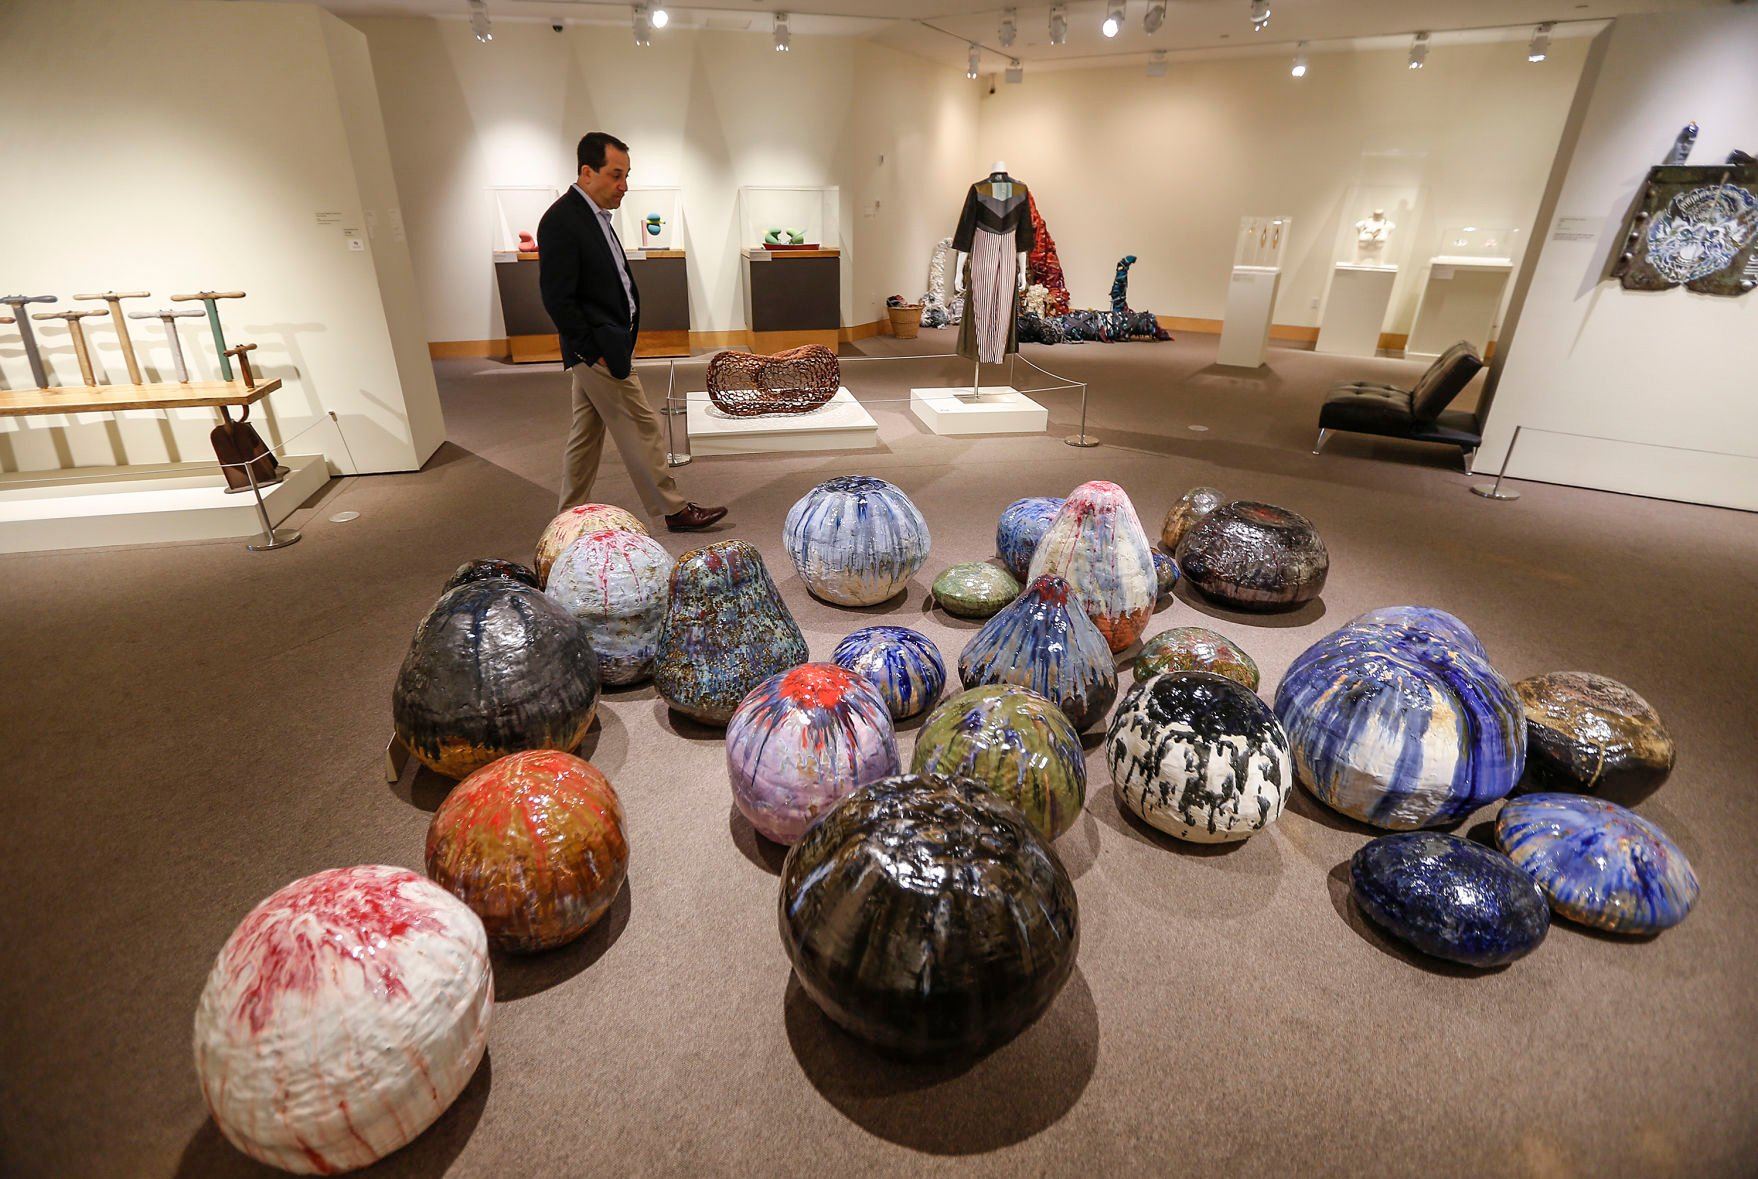 Executive Director Gary Stoppelman walks past an exhibit by William J. O’Brien, titled “Earth, Water, Fire, Wind, and Space Pt. 2,” at the Dubuque Museum of Art on Tuesday.    PHOTO CREDIT: Dave Kettering